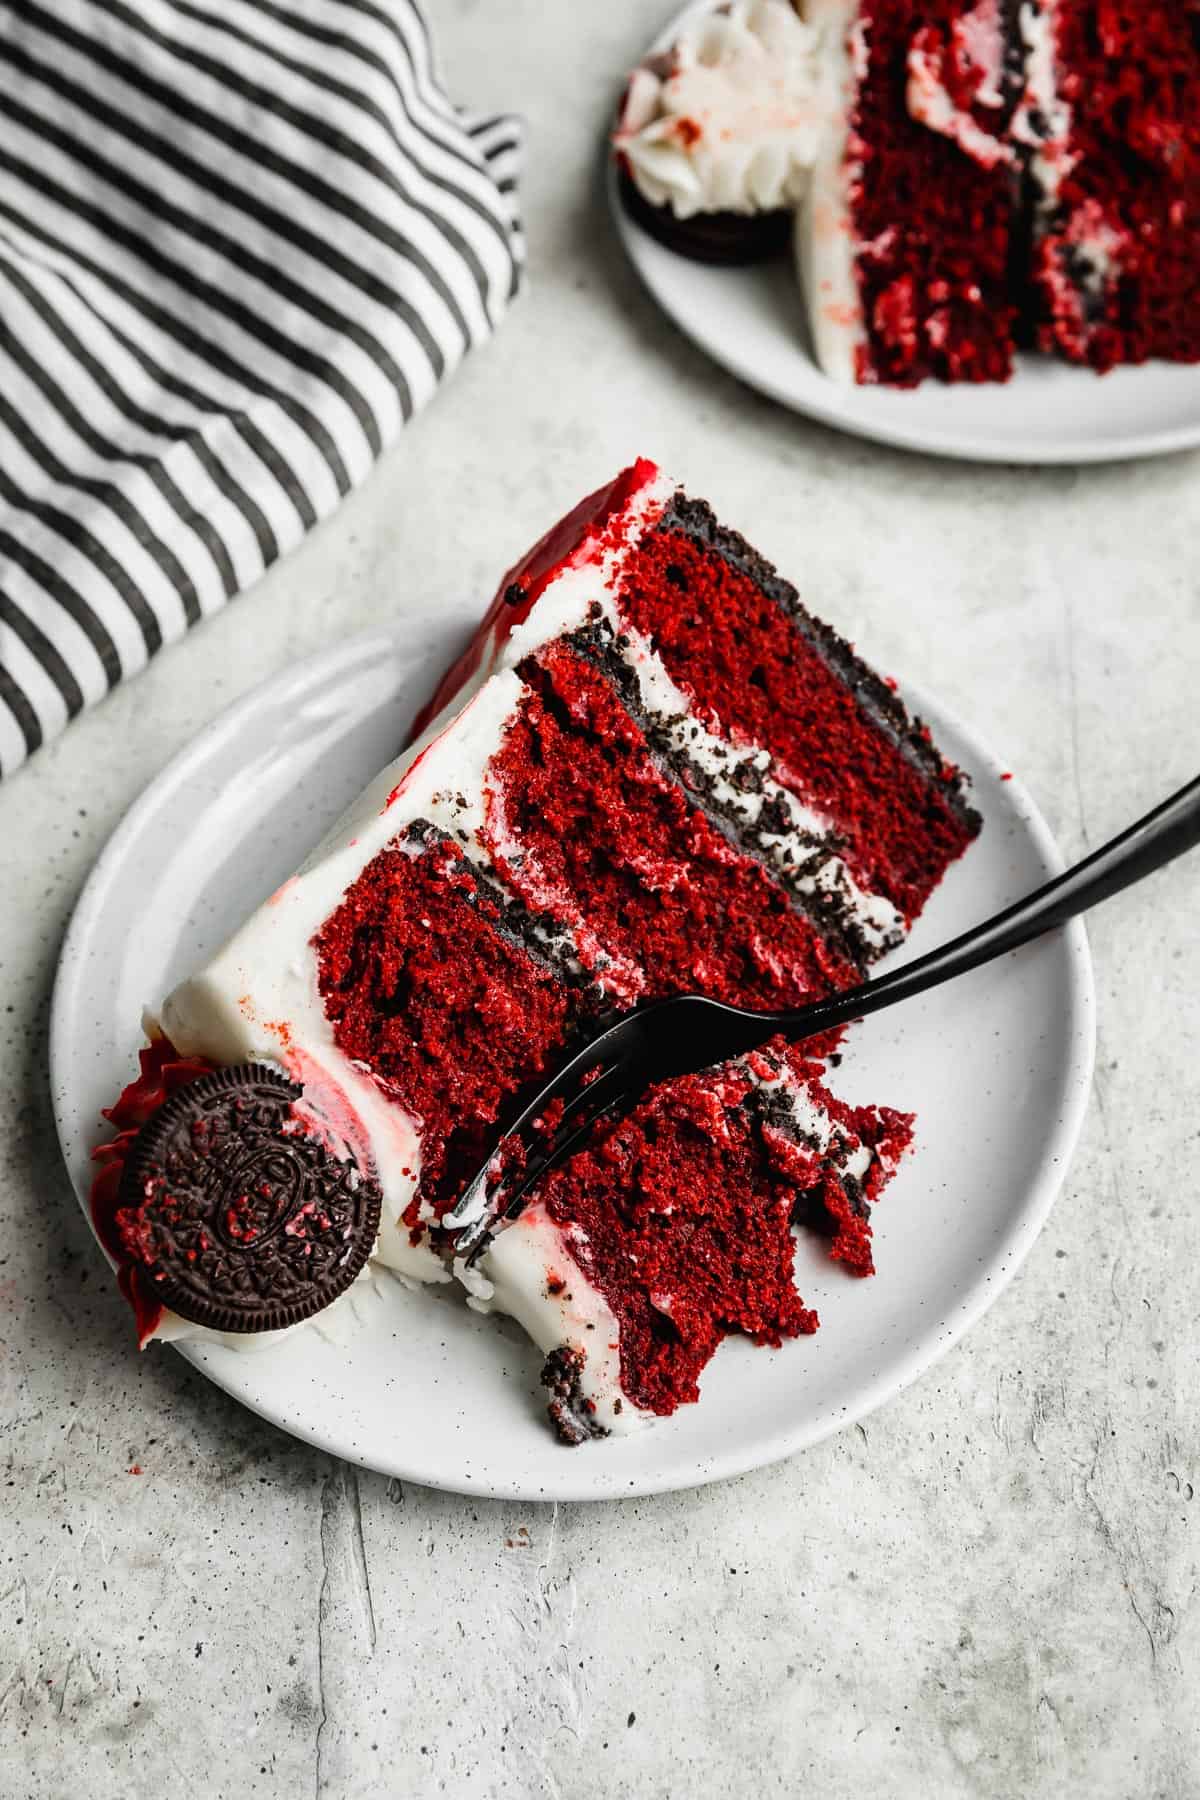 A slice of Oreo Red Velvet Cake on a white plate with a black fork cutting into it.